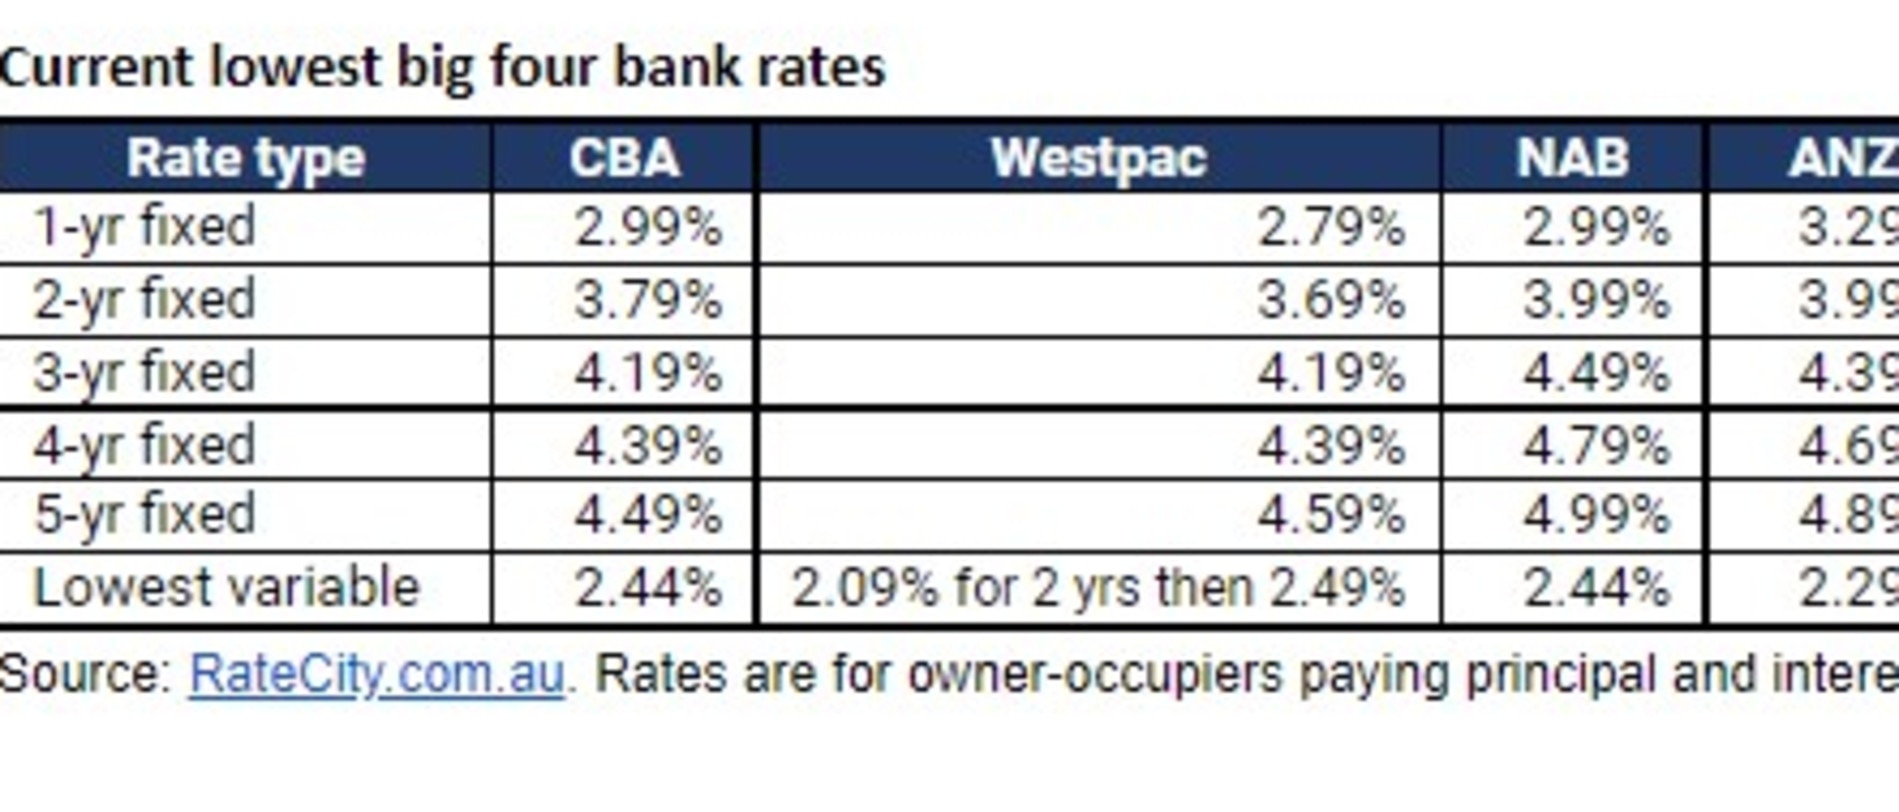 The lowest interests currently available to borrowers, according to RateCity.com.